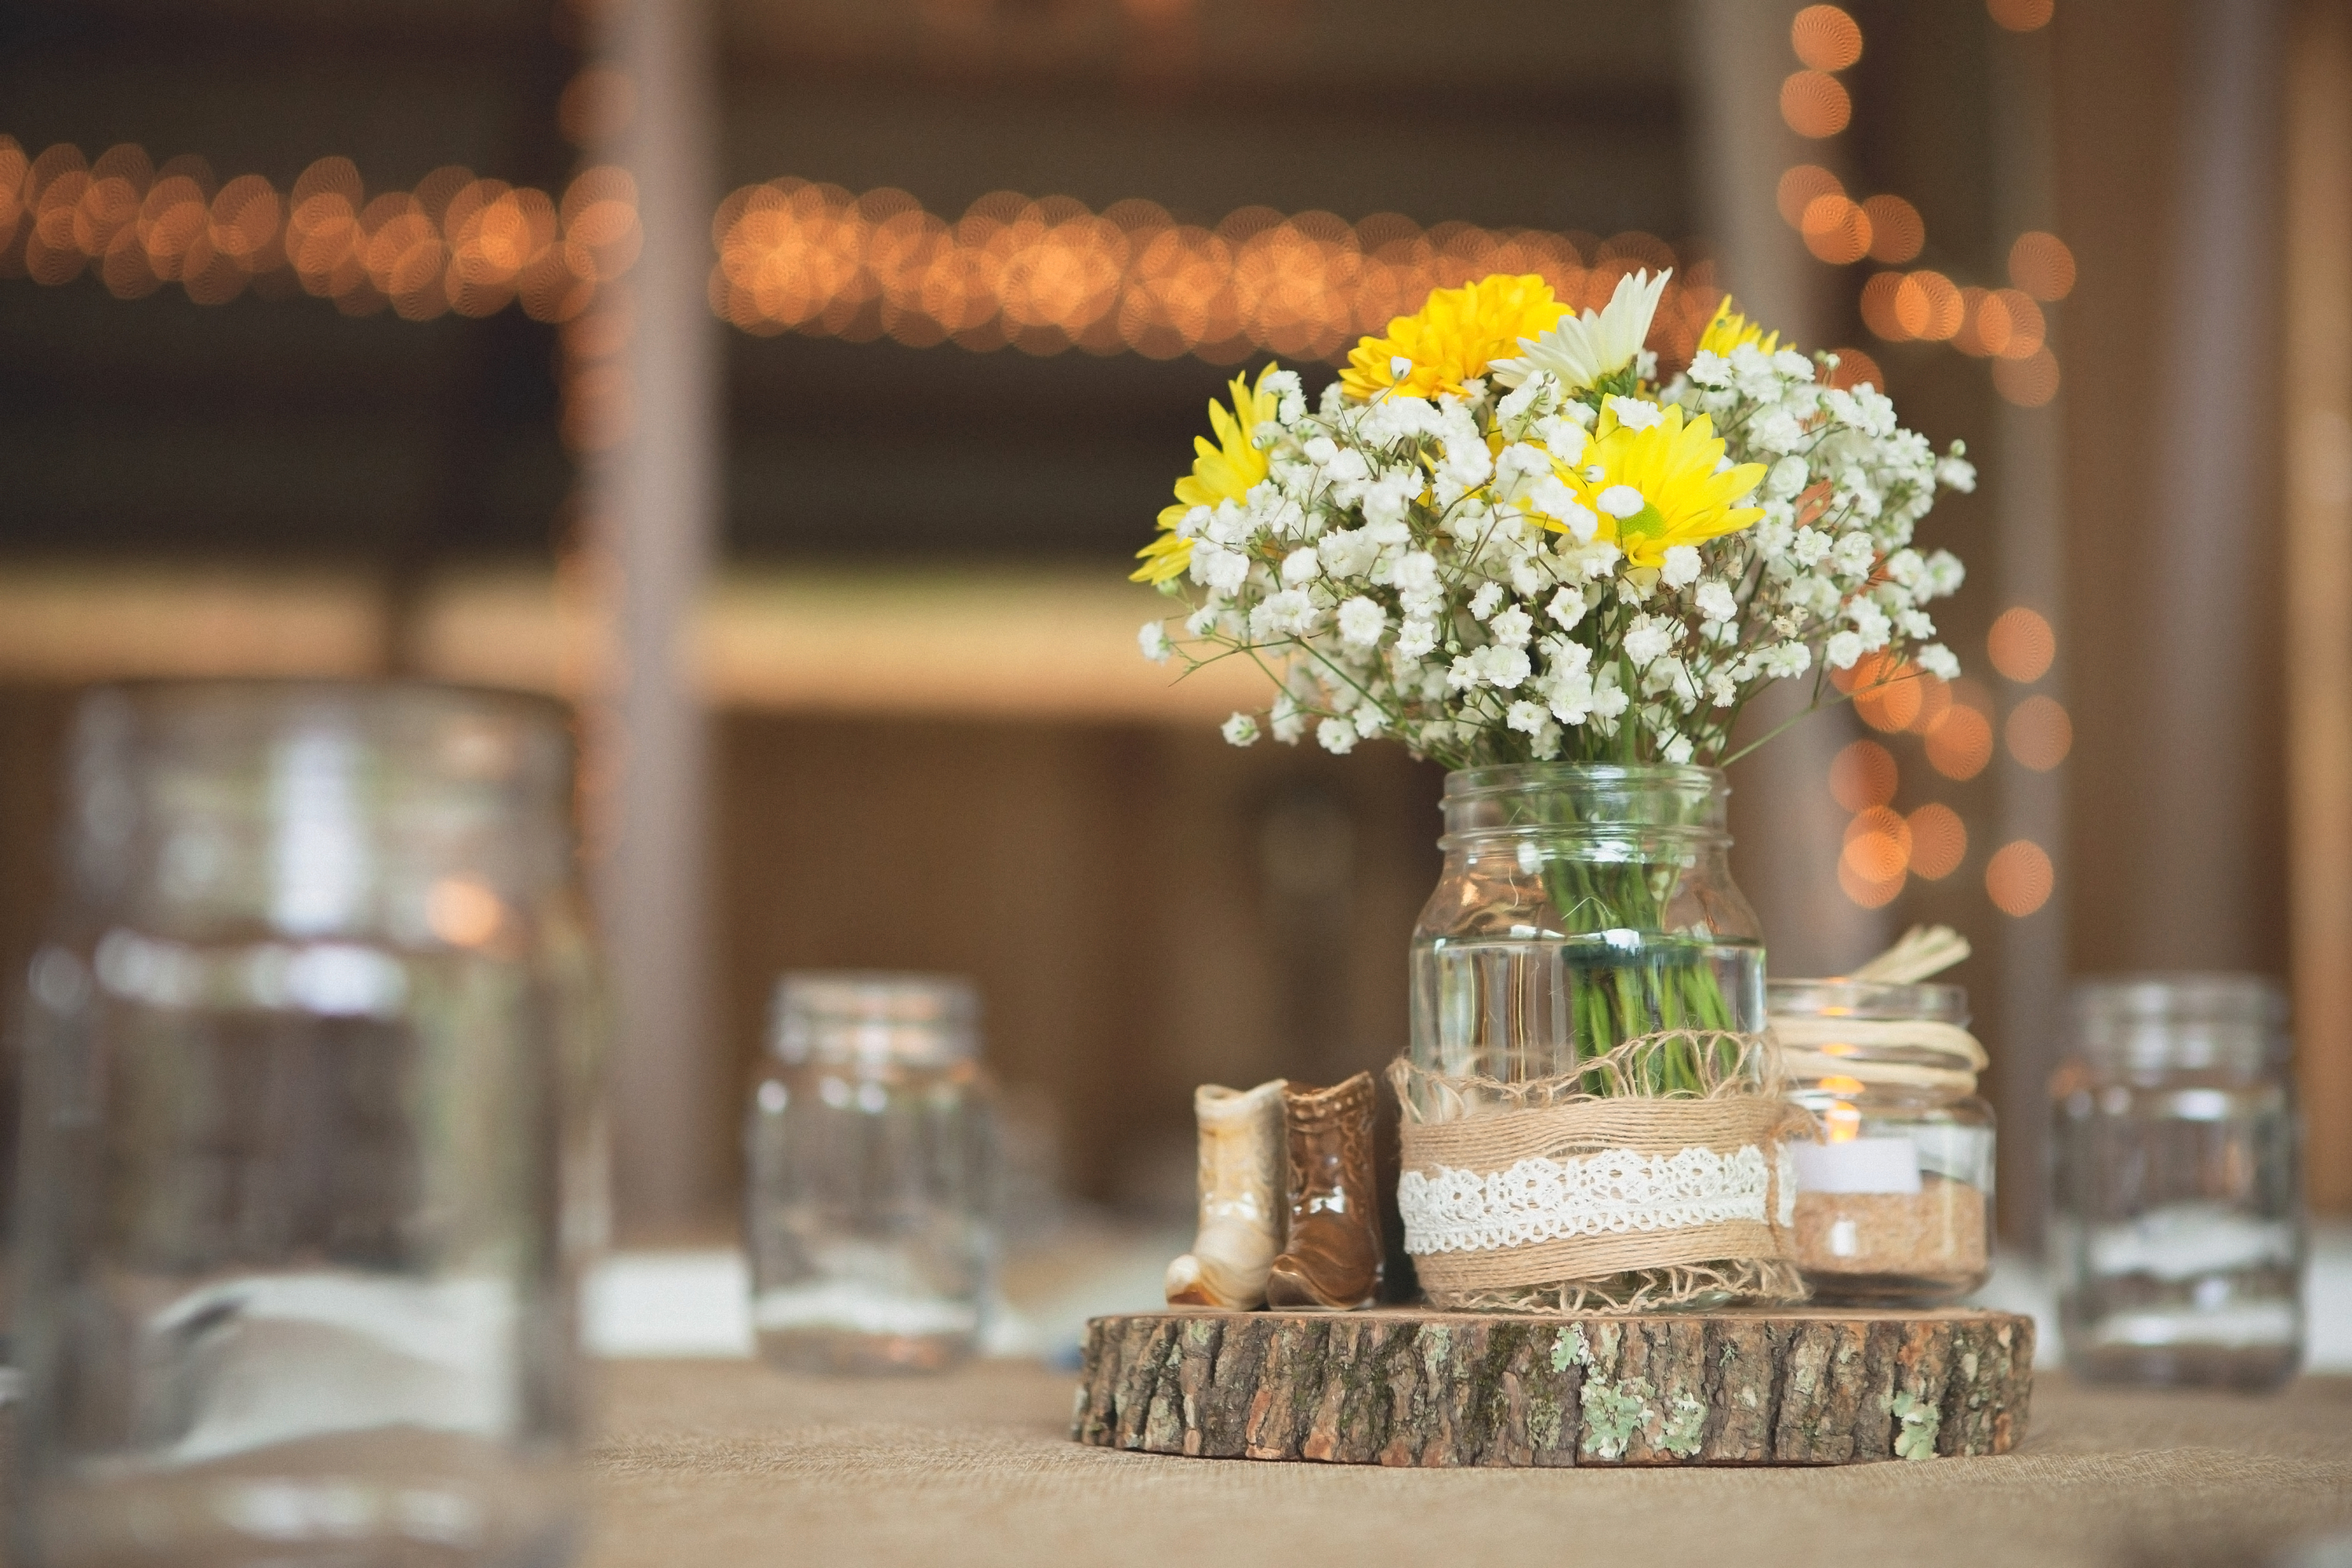 There's something so cute and simple about a mason jar filled with flowers. Check out all of these country barn reception decor ideas. 